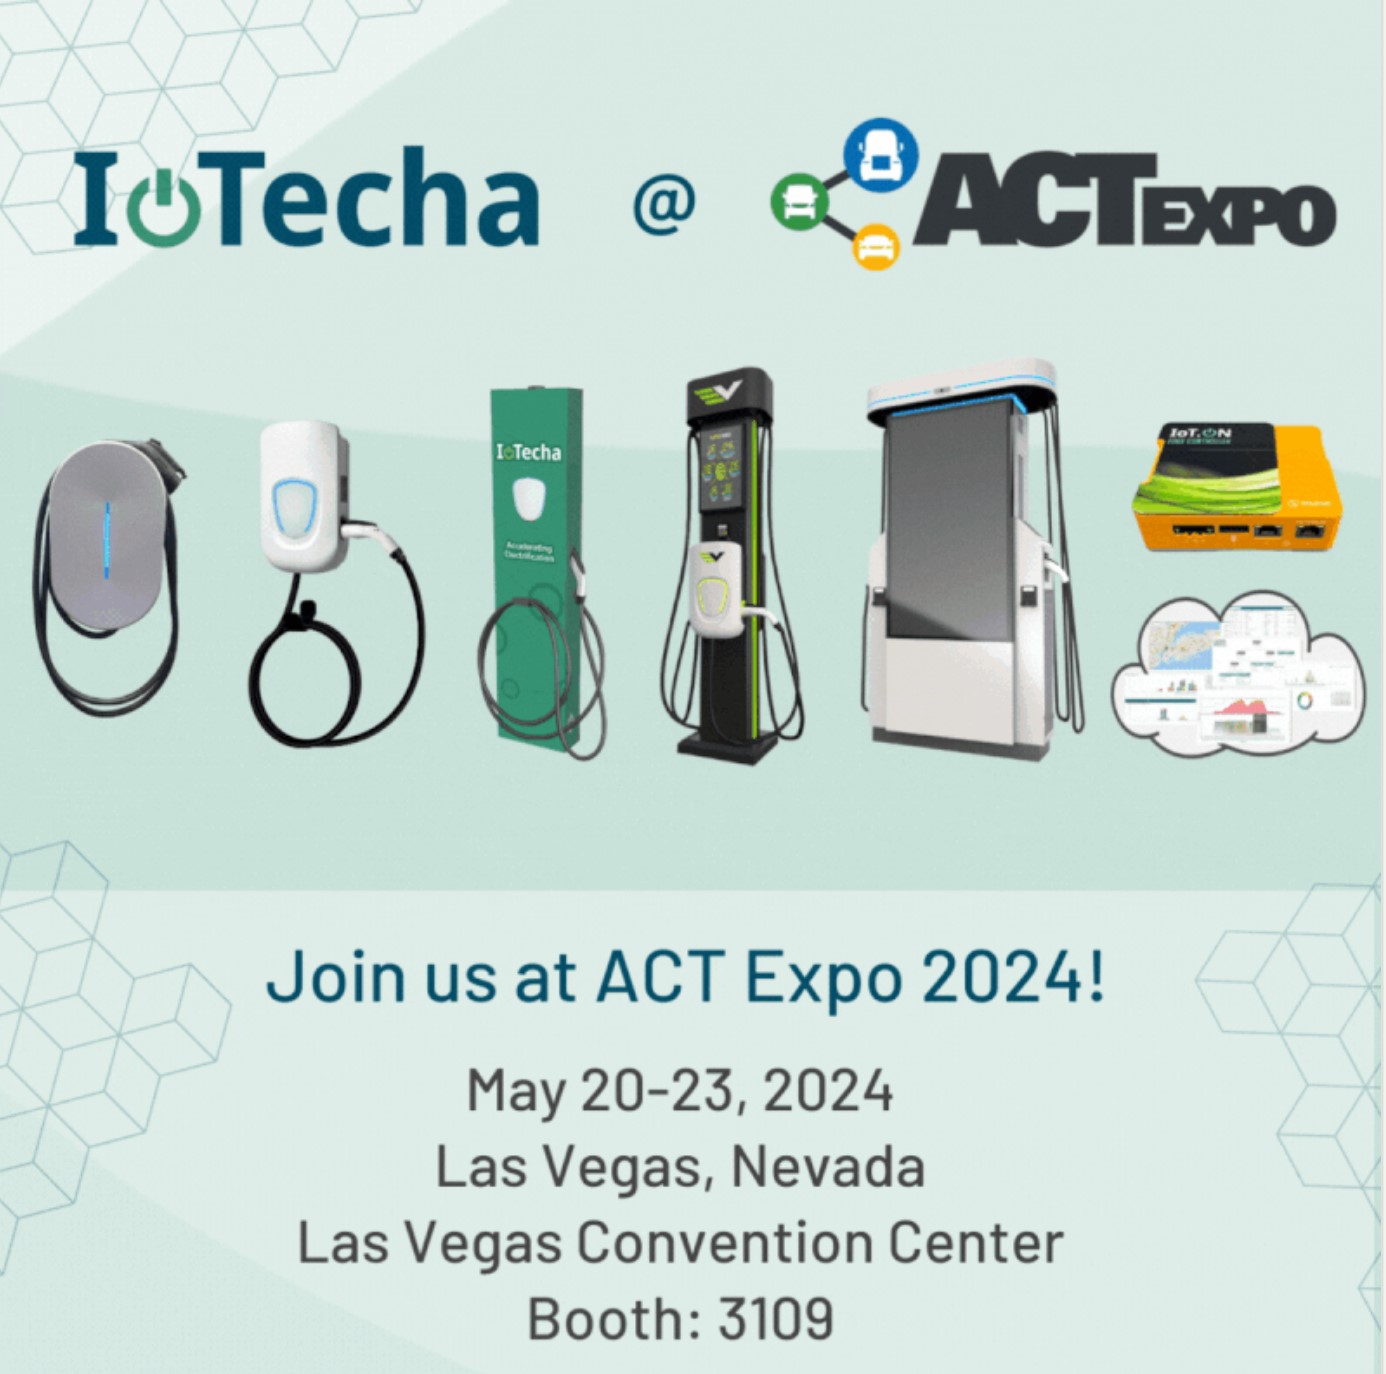 IoTecha will be at ACT Expo in Las Vegas later this month!